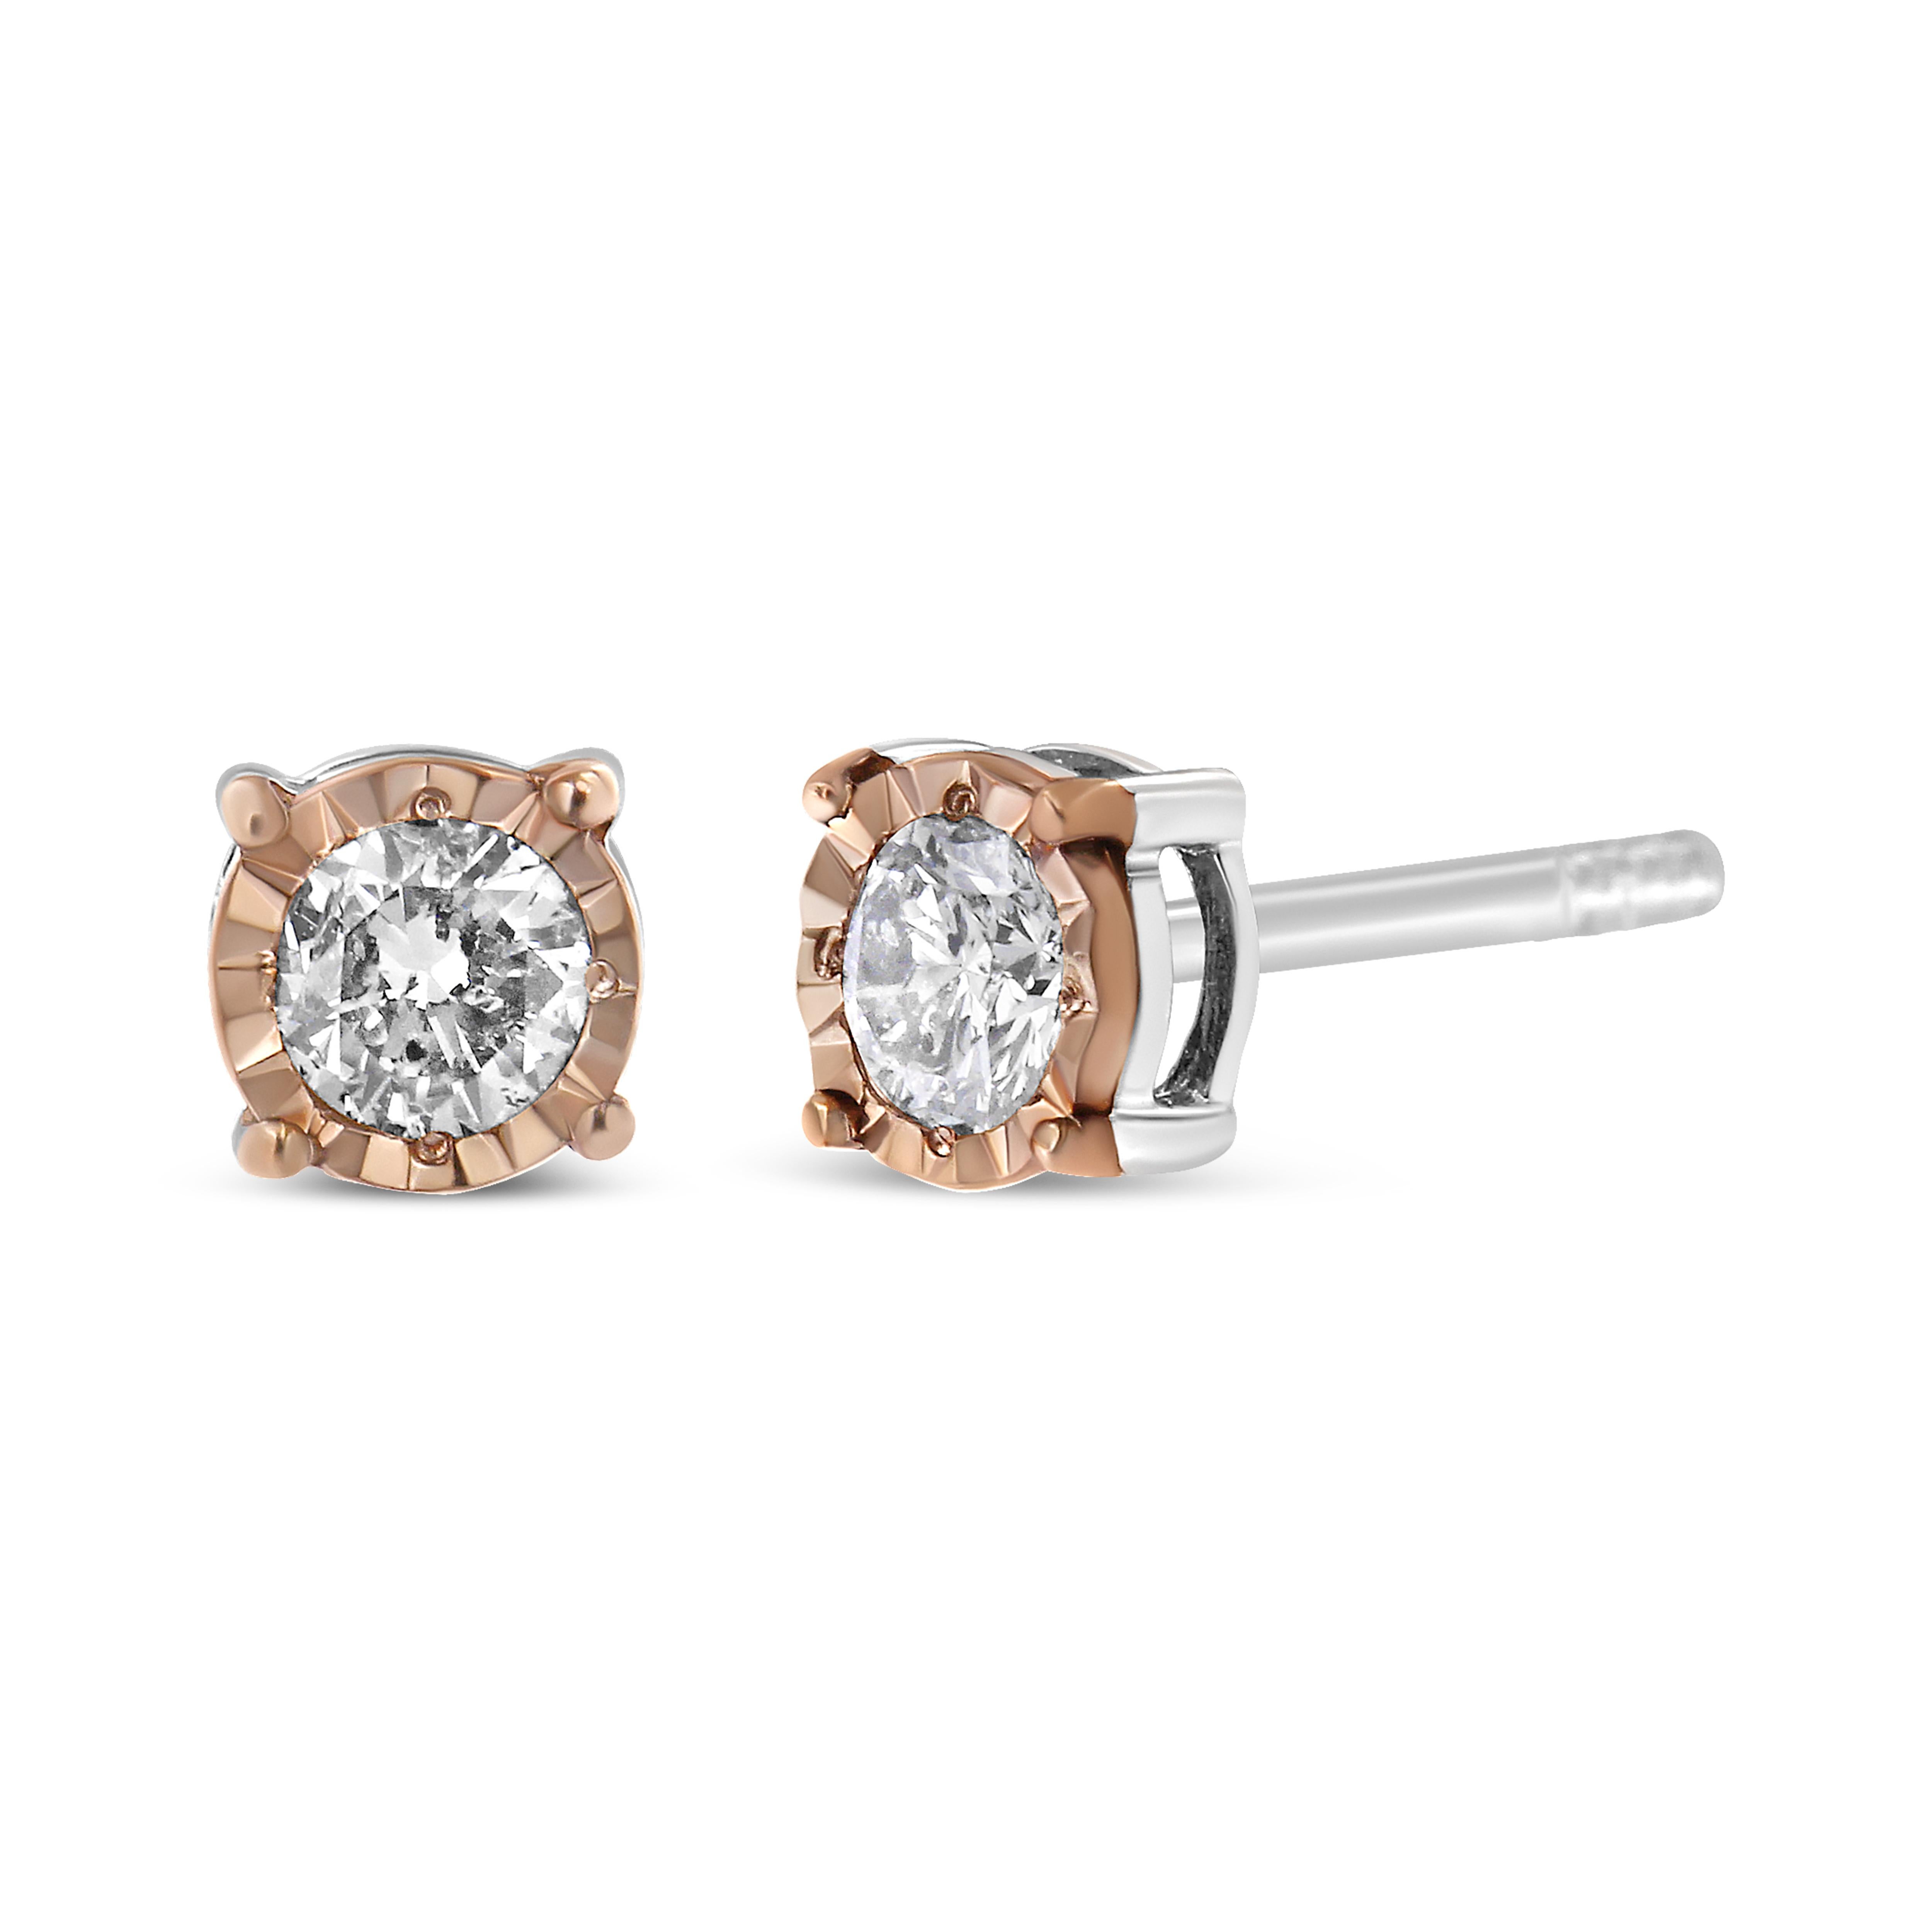 Add a shimmering touch to your wardrobe with these elegant and extravagant diamond earrings. Fashioned in the round shape, the earrings are crafted of your choice of sterling silver flashed with white rhodium, or with 10K rose or yellow gold